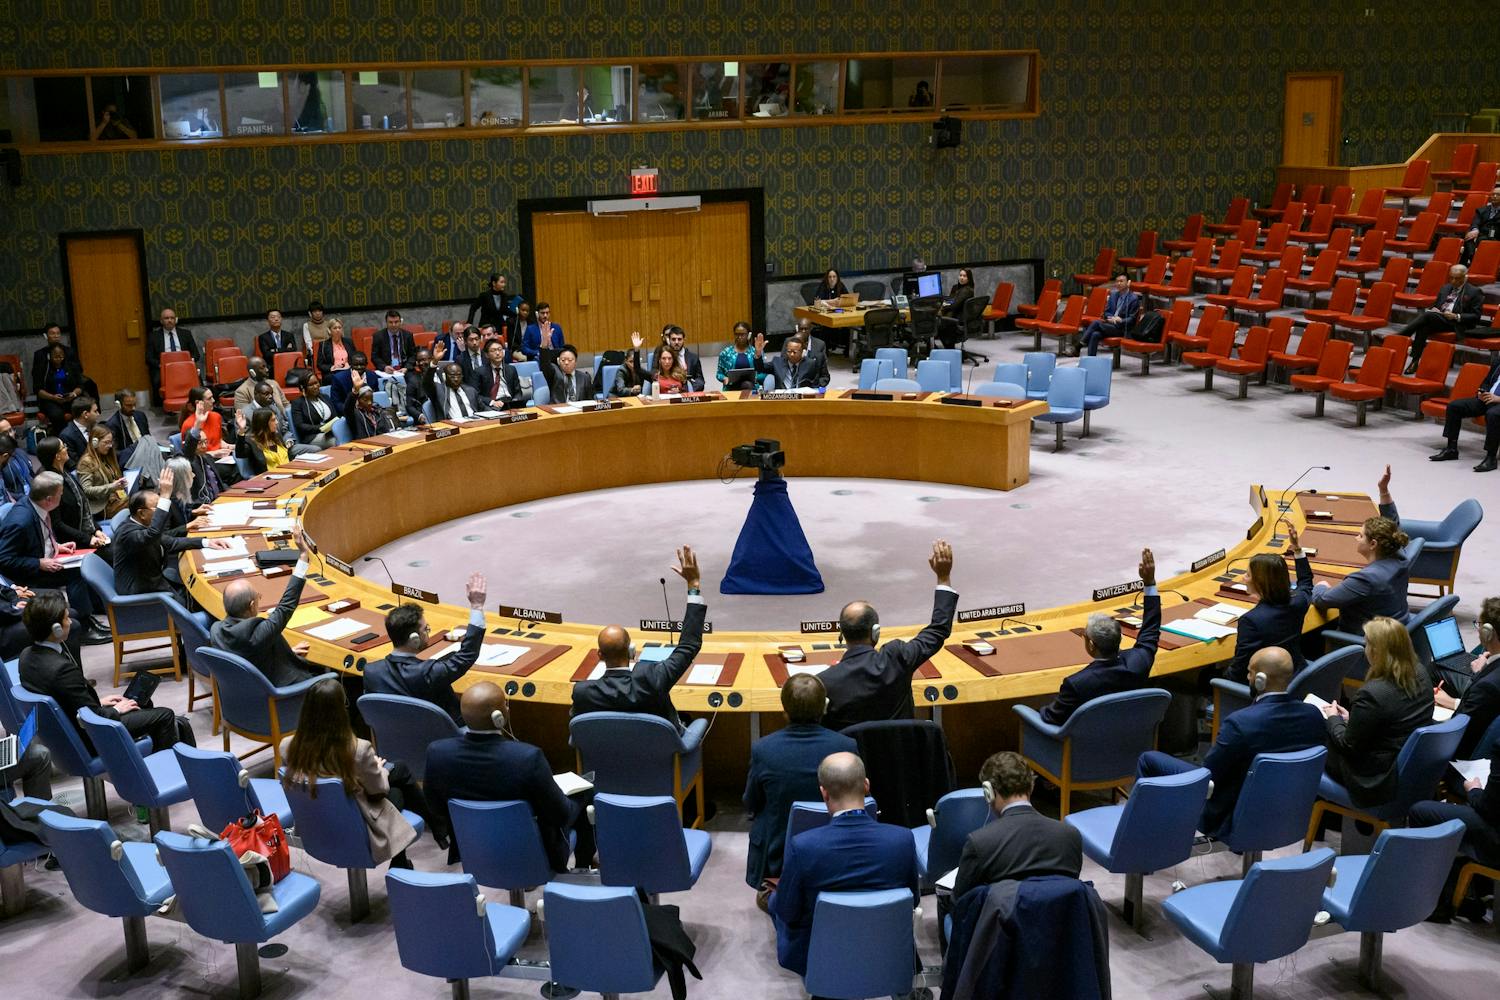 The UN resolution could be a turning point in the Gaza conflict